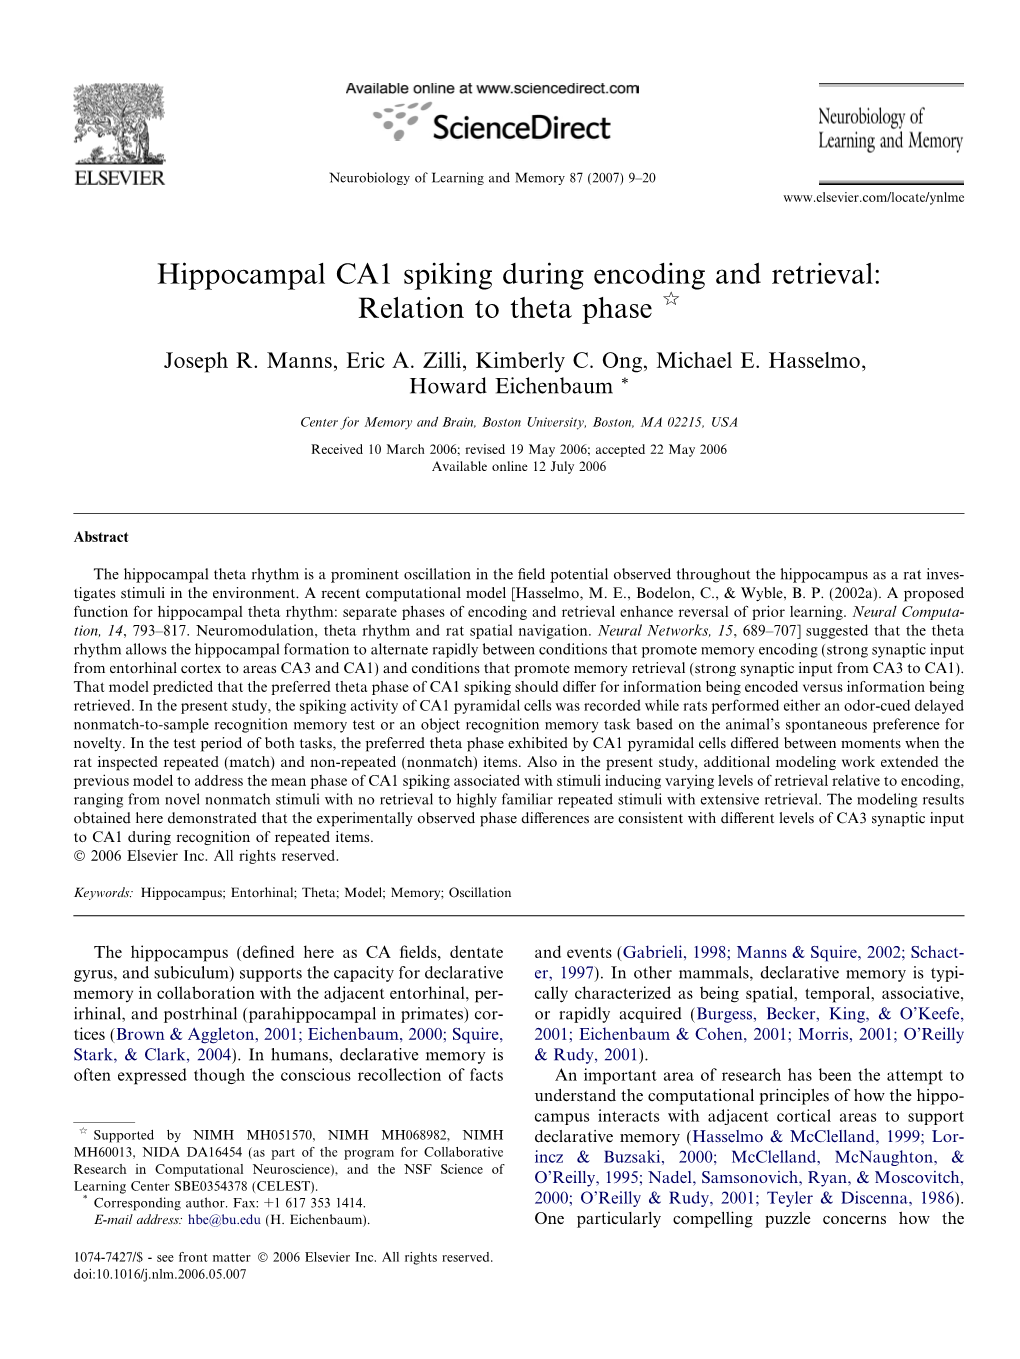 Hippocampal CA1 Spiking During Encoding and Retrieval: Relation to Theta Phase Q